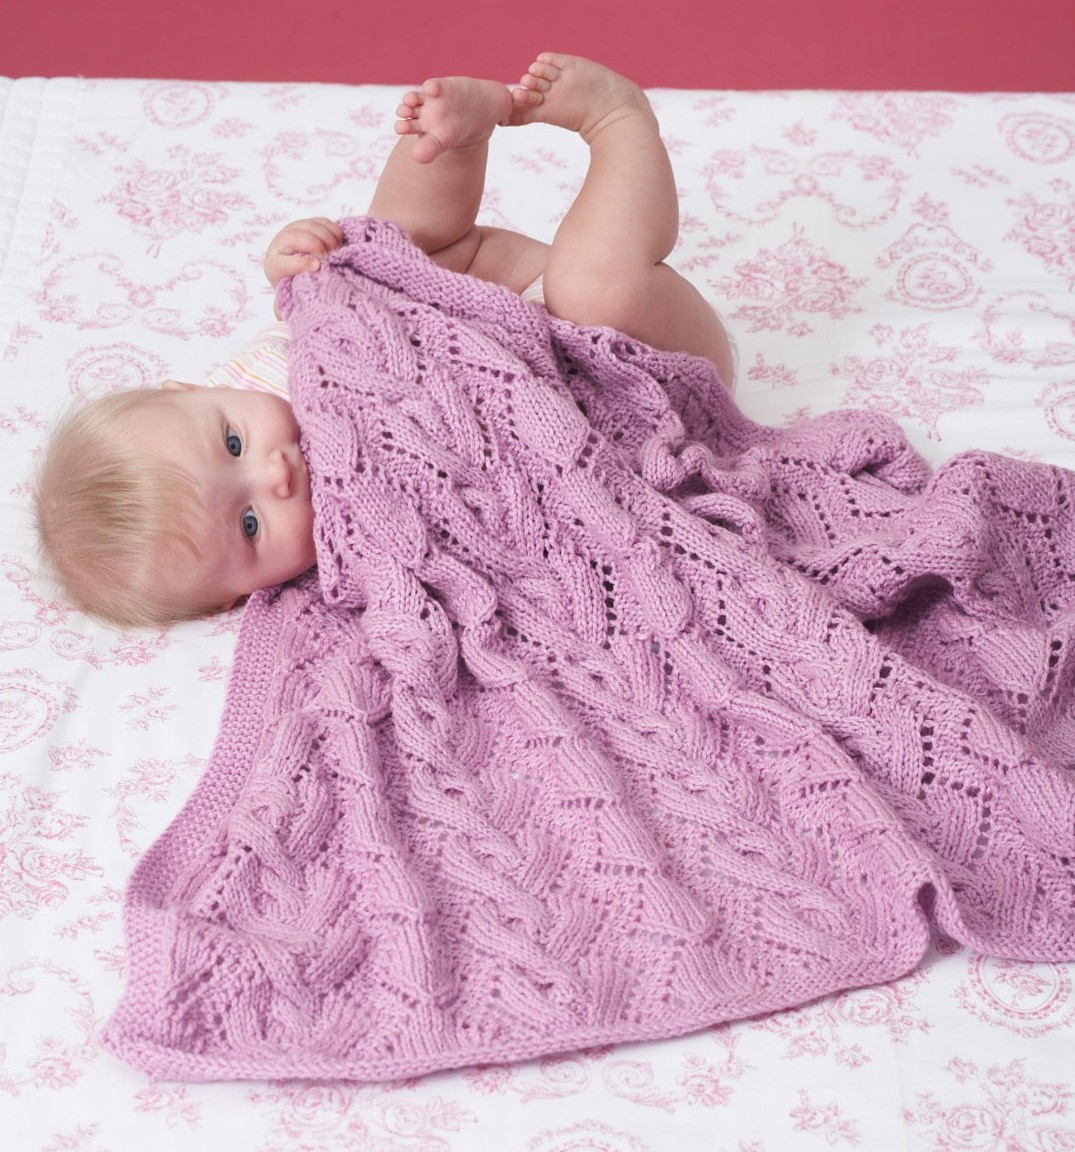 Free Knitting Patterns For Baby Blankets Awww Some Ba Blanket Knitting Patterns In The Loop Knitting